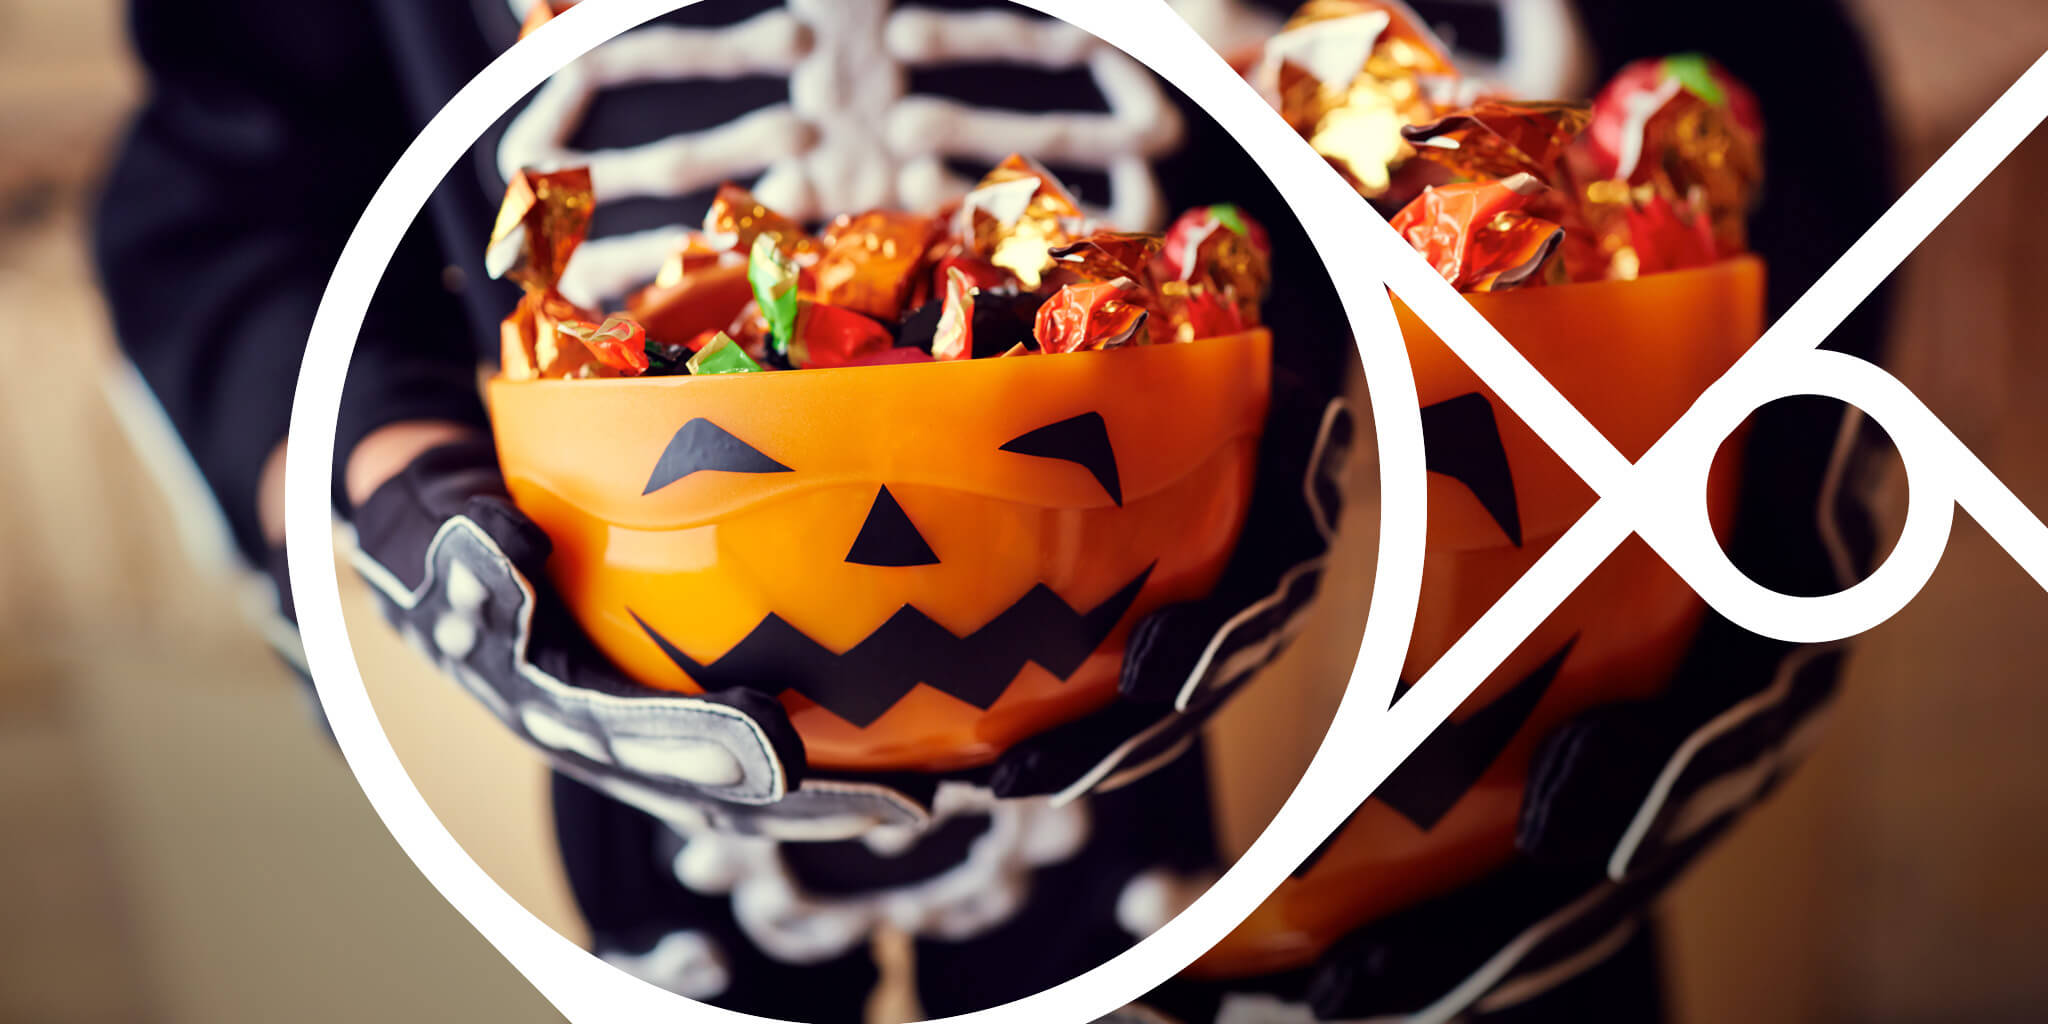 We're unwrapping the top-performing ads from candy brands from last Halloween season